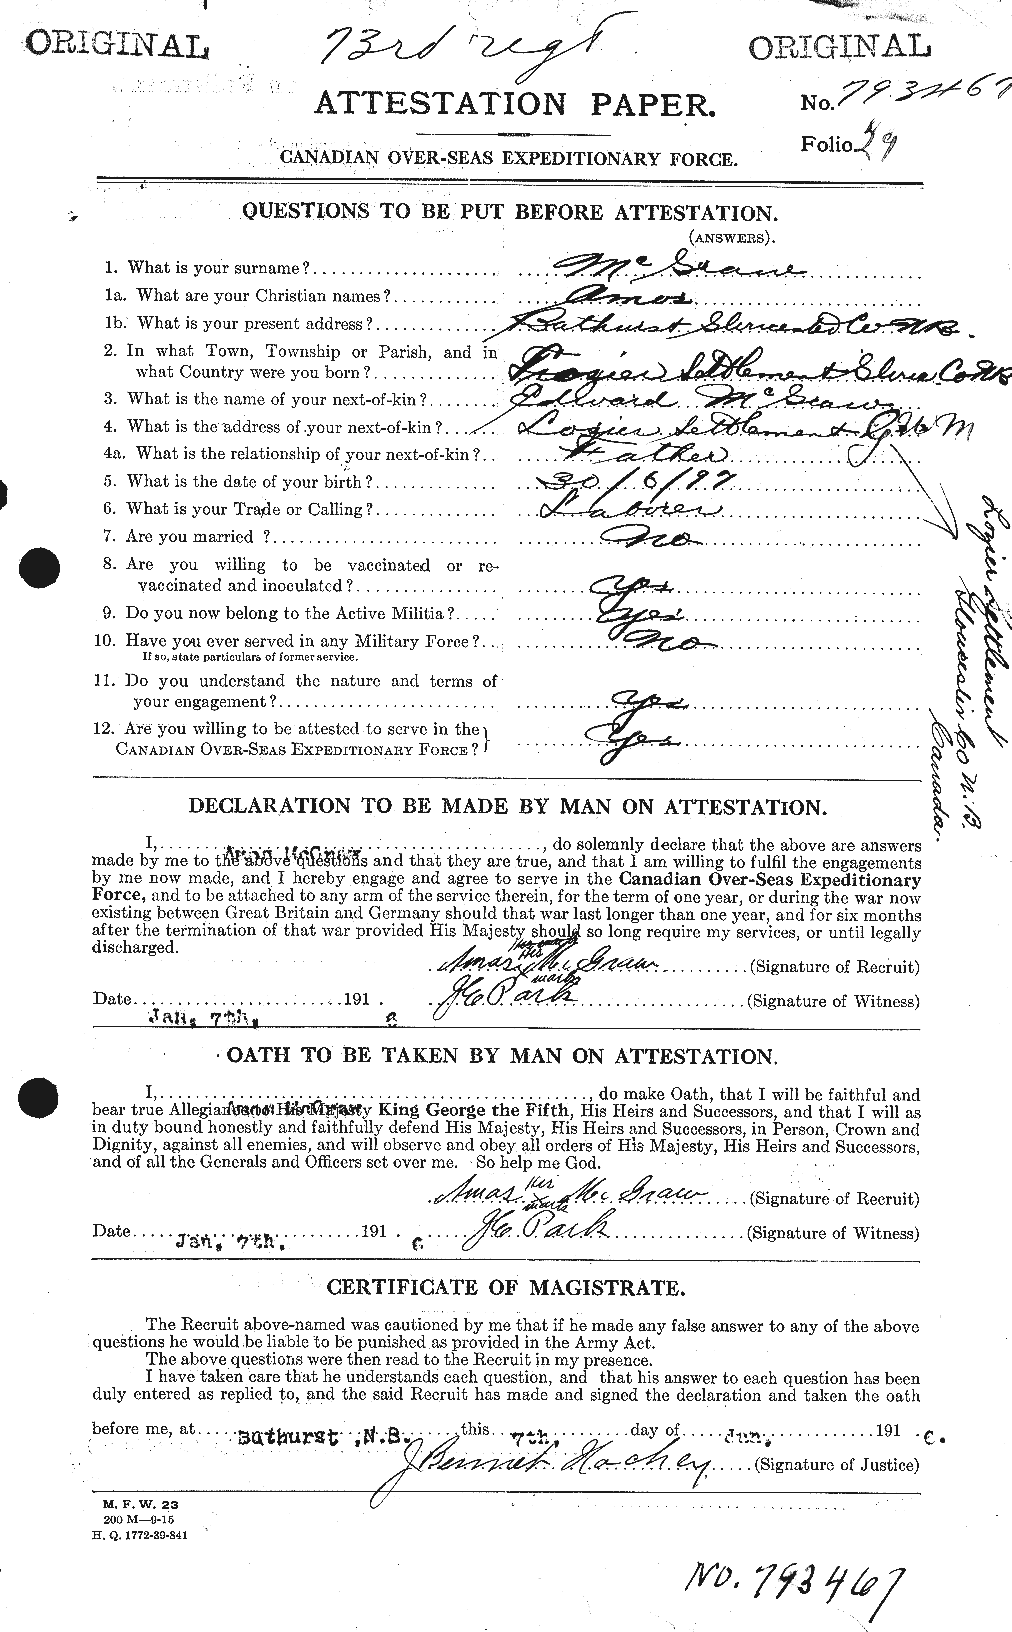 Personnel Records of the First World War - CEF 523718a